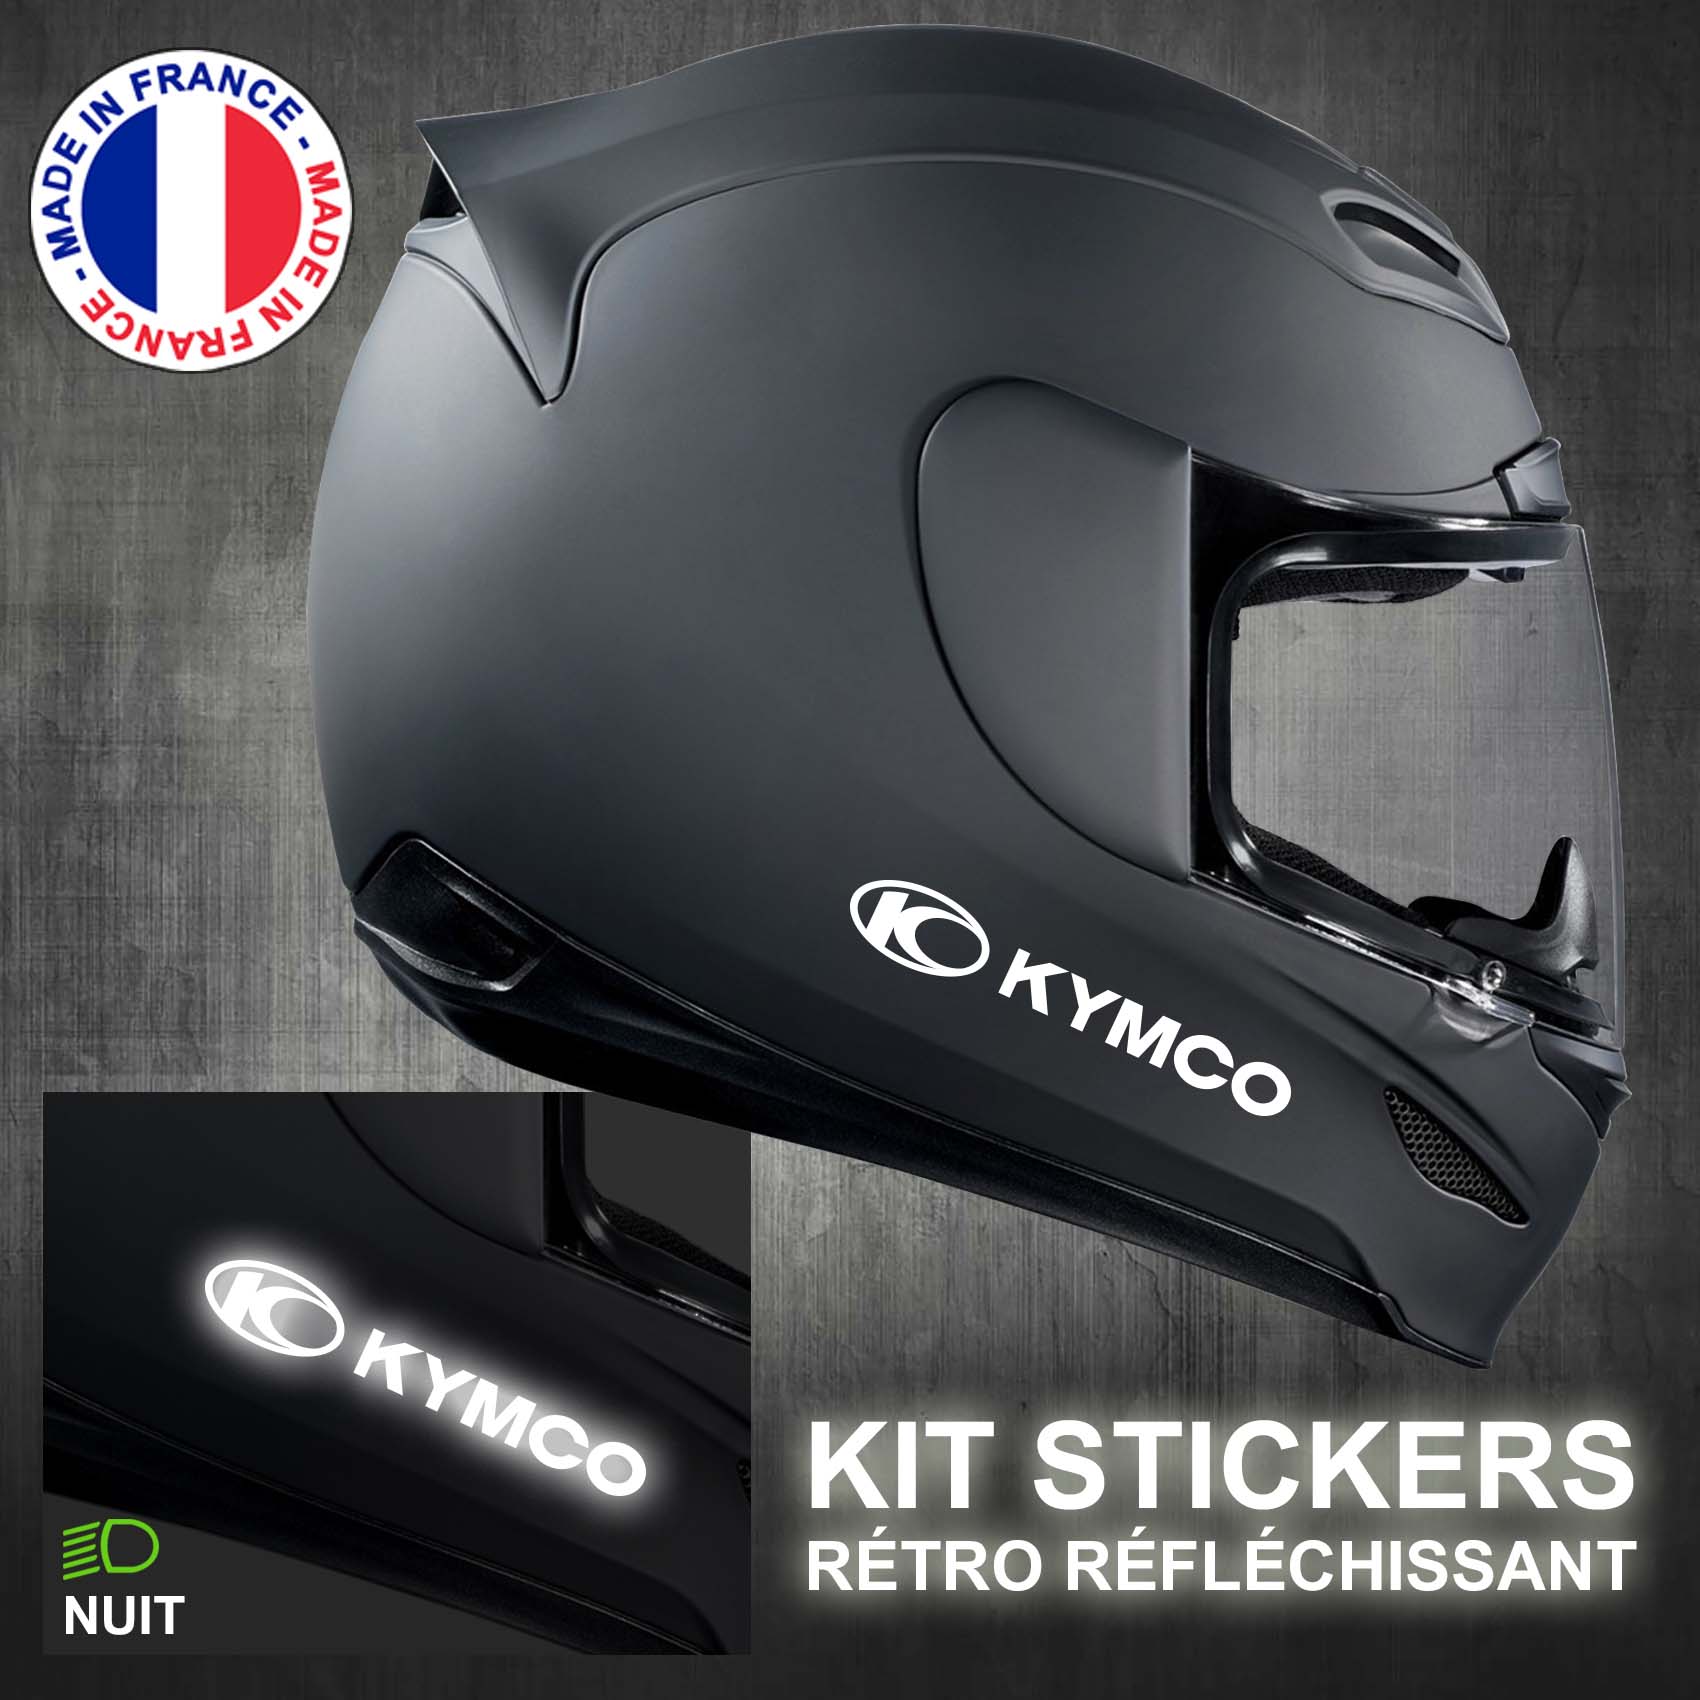 stickers-casque-moto-kymco-ref1-retro-reflechissant-autocollant-noir-moto-velo-tuning-racing-route-sticker-casques-adhesif-scooter-nuit-securite-decals-personnalise-personnalisable-min